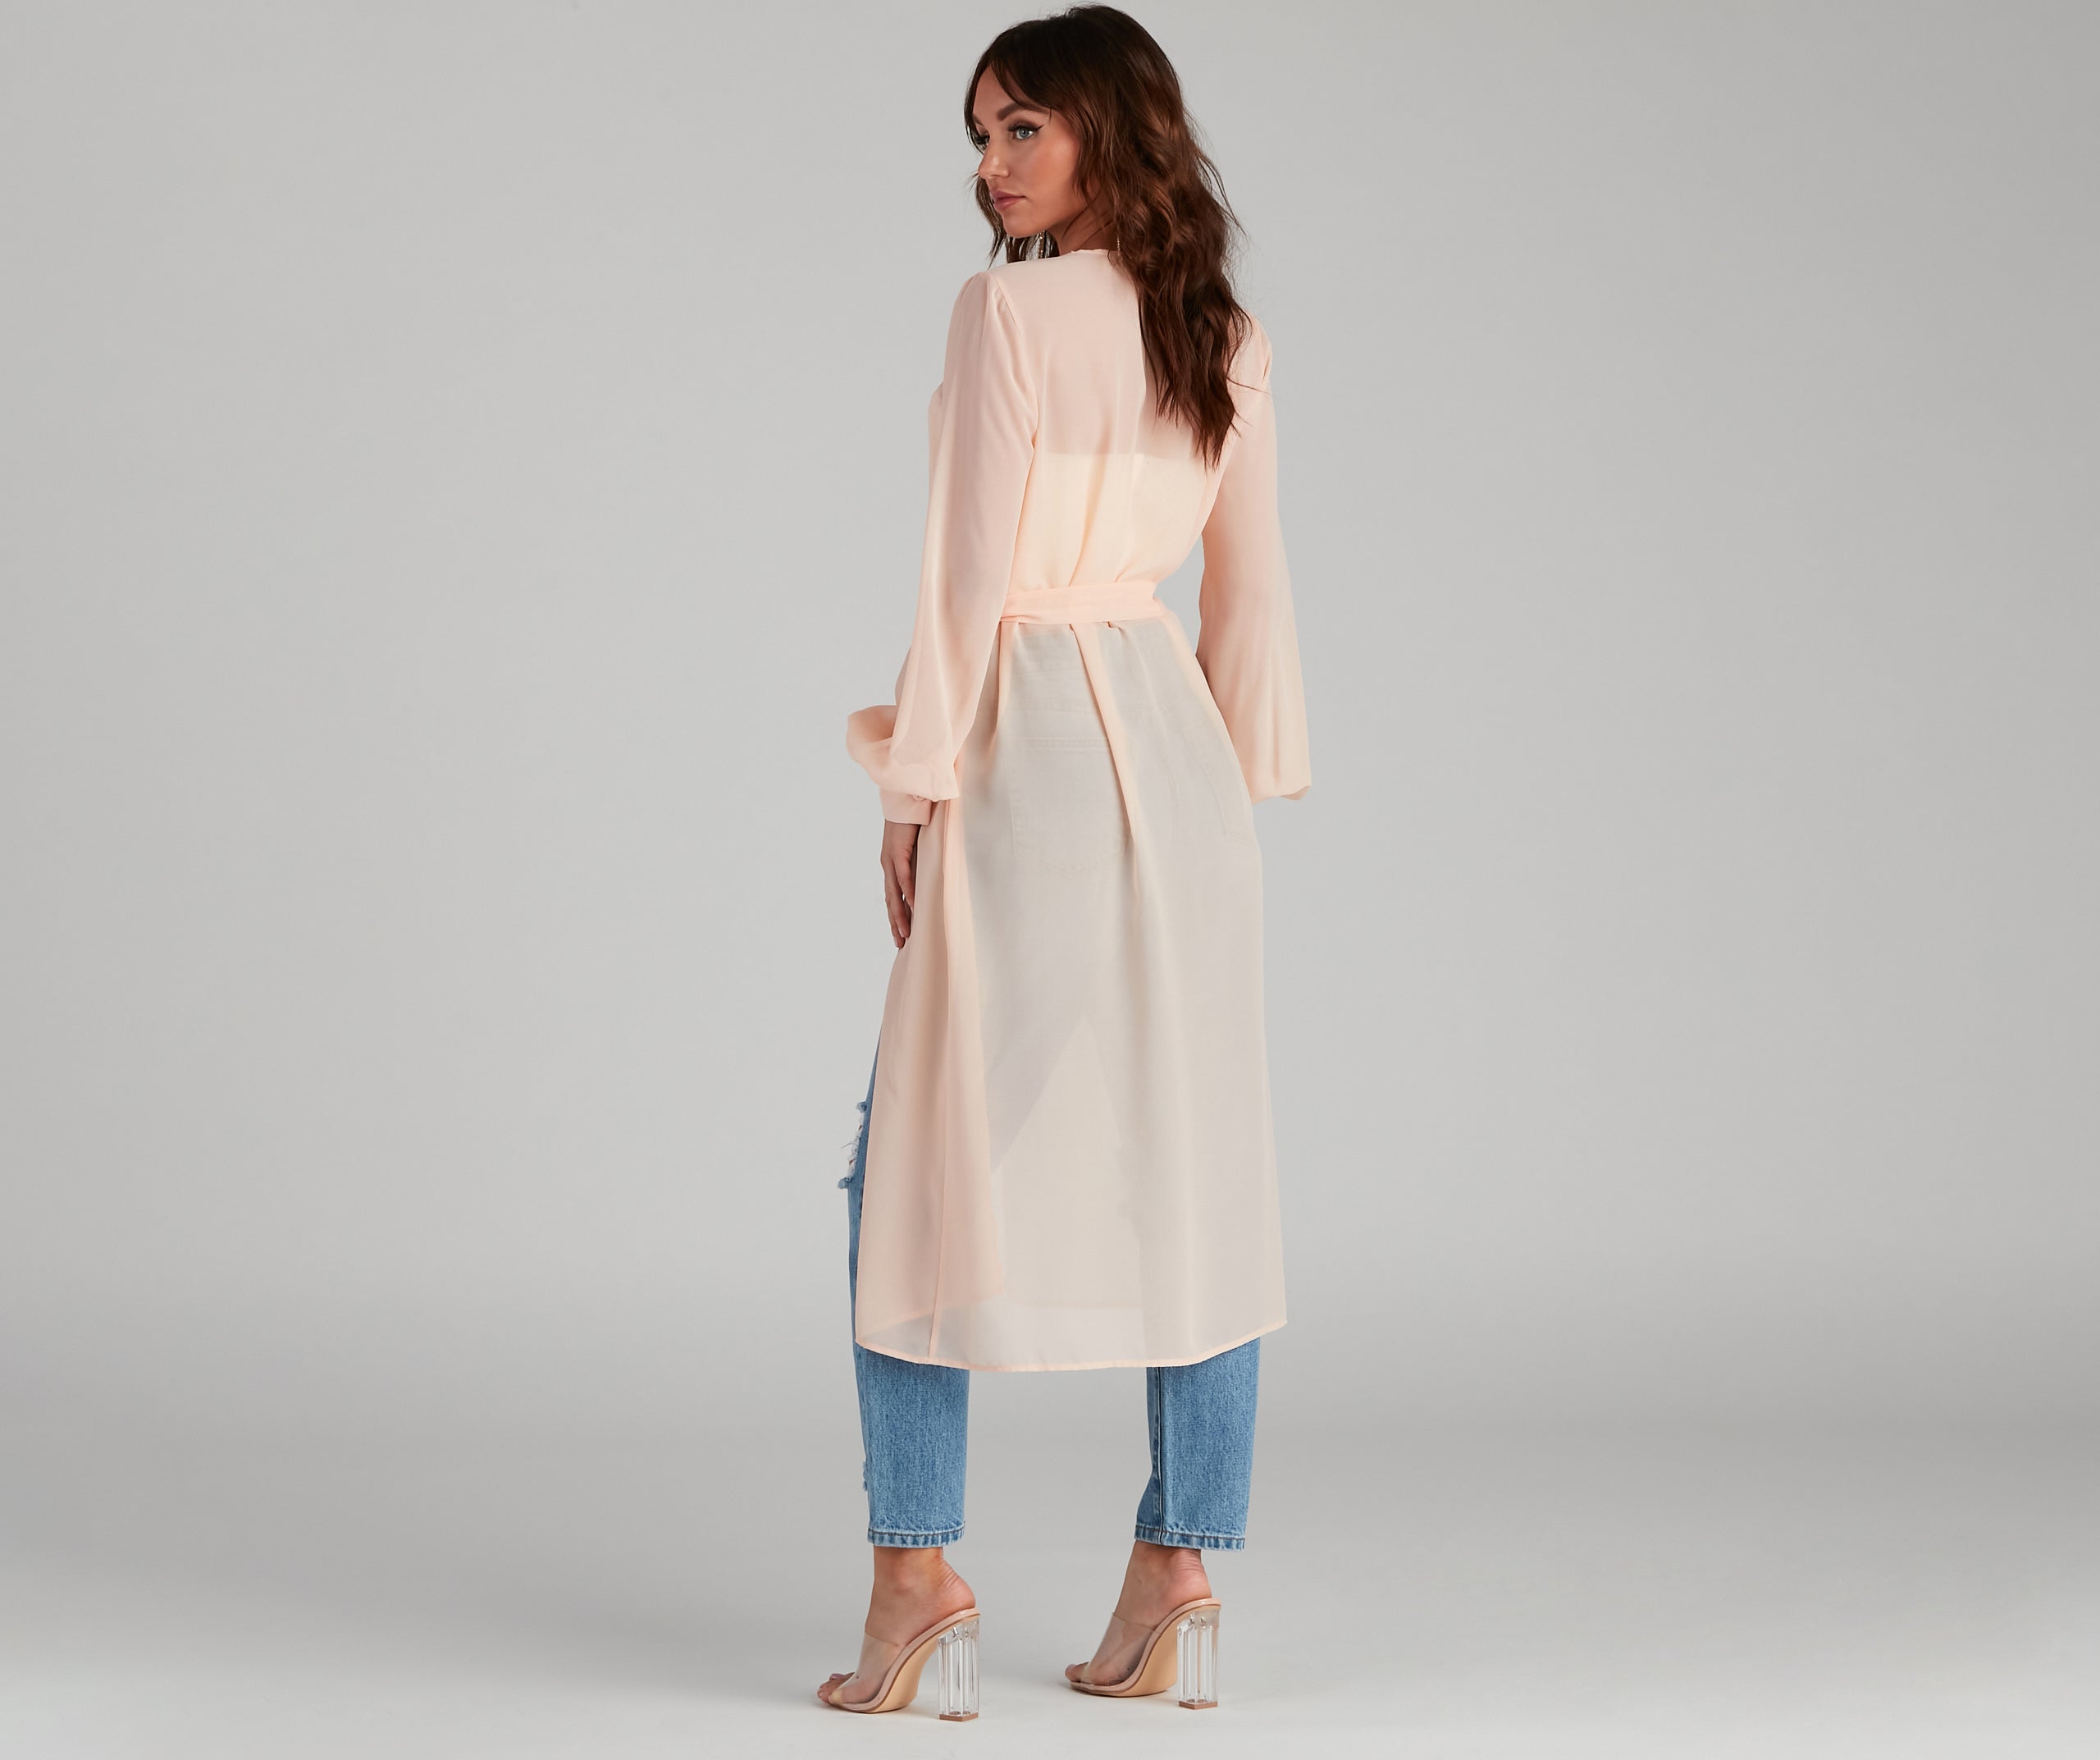 Chic Sheer Chiffon Belted Trench